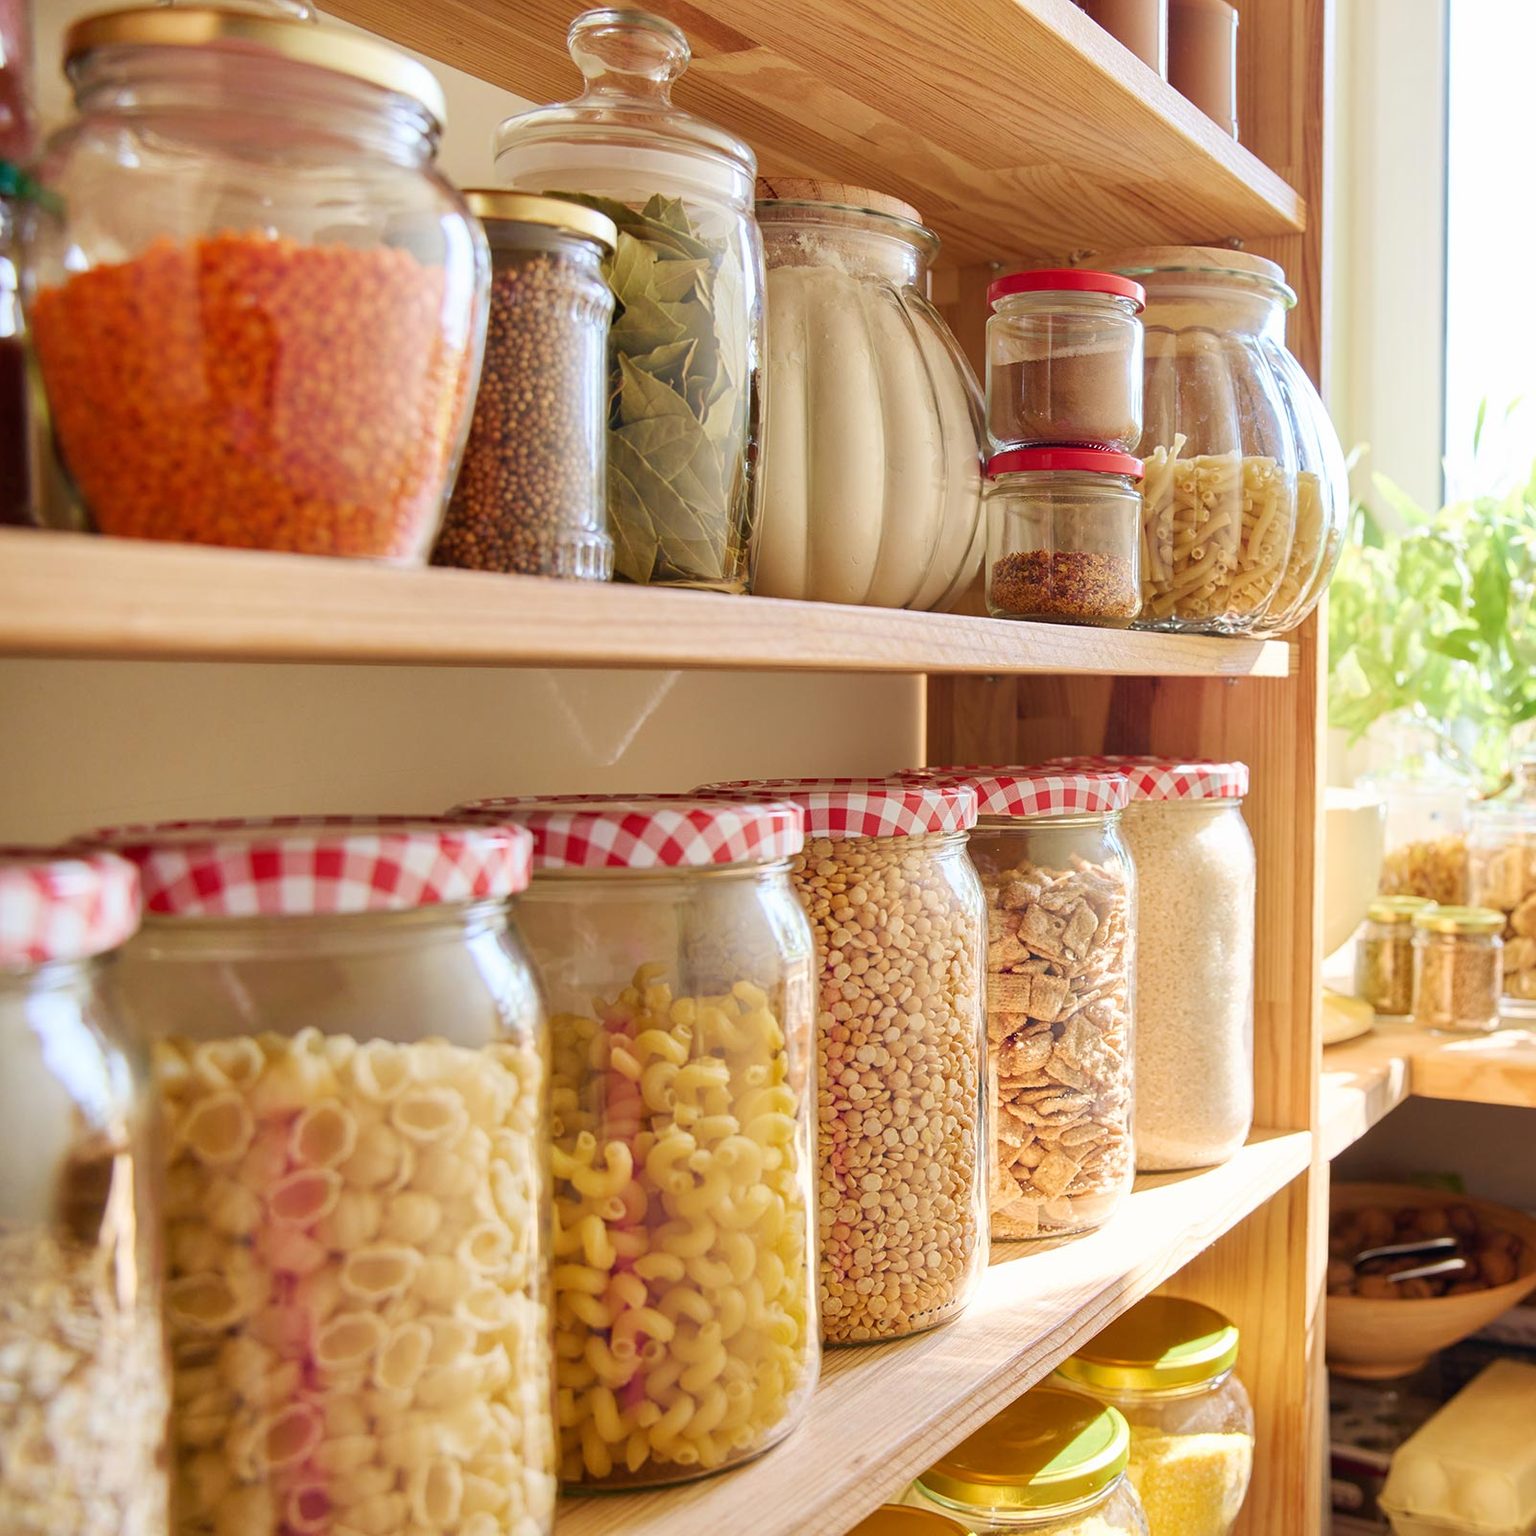 8 Ingredients You Should Have on Hand to Recession-Proof Your Pantry ...